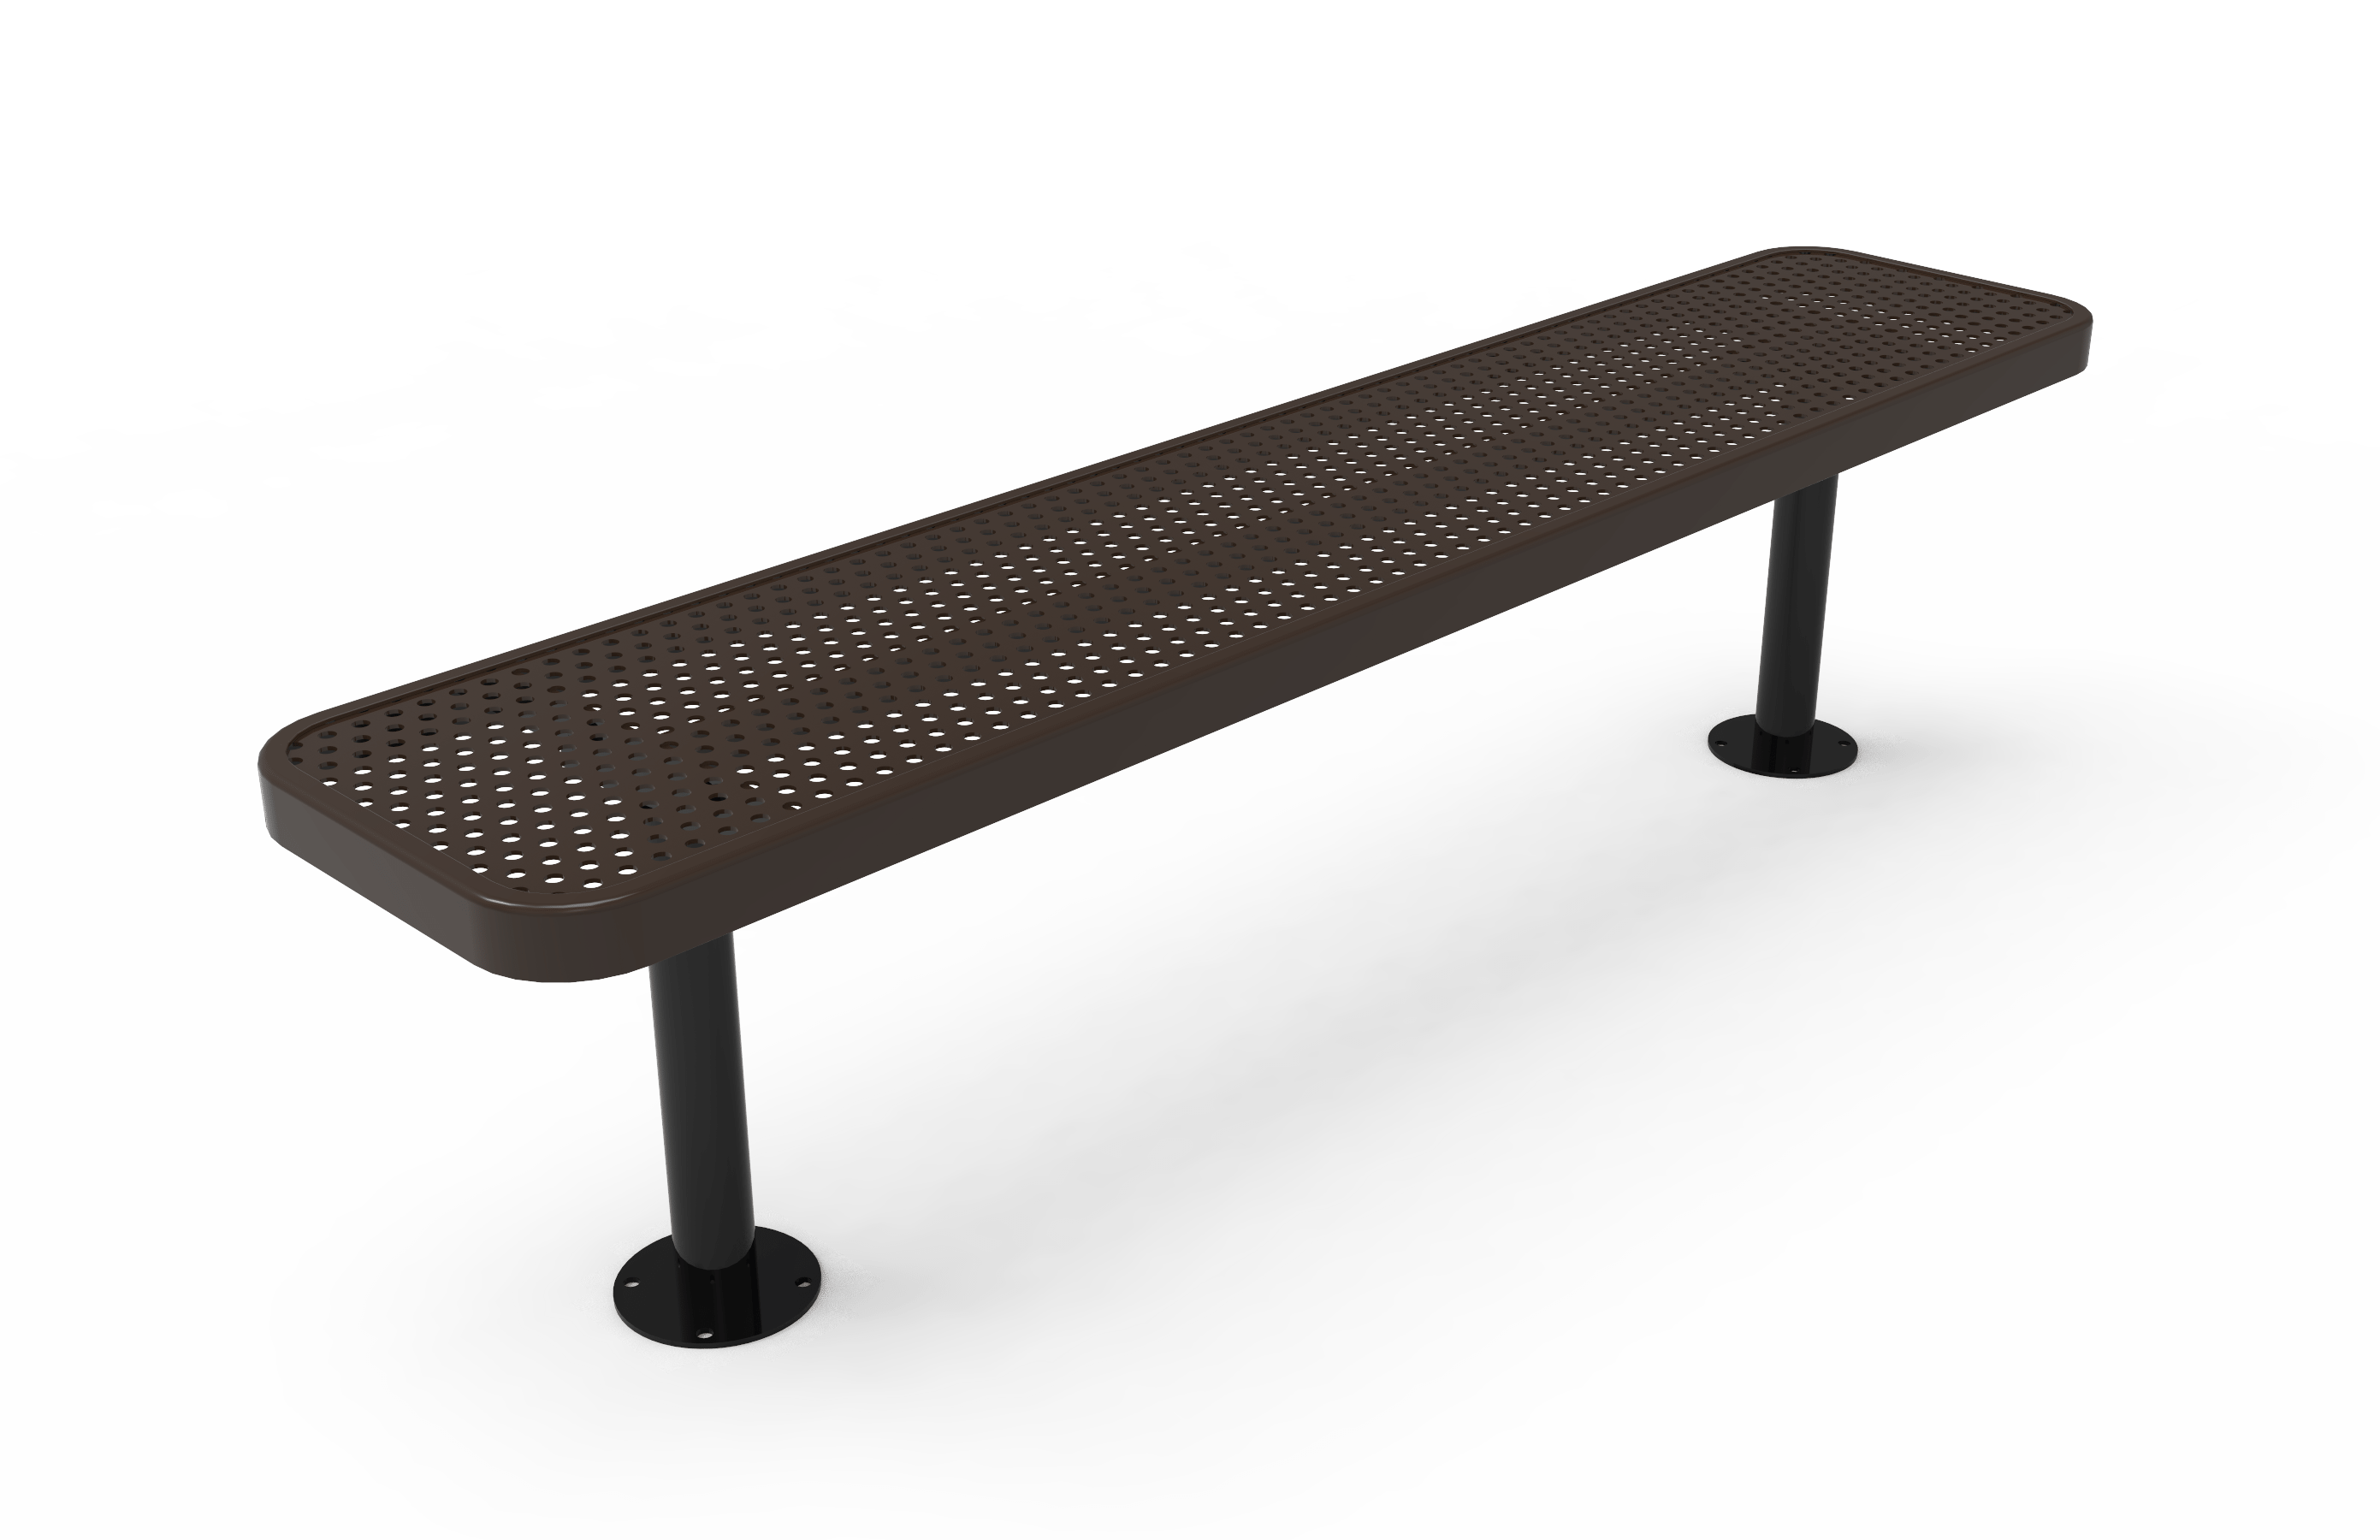 6′ Players Bench Without Back-Punched
BPY06-D-35-000
Industry Standard Finish
$549.00
BPY06-B-35-000
Advantage Premium Finish
$659.00
